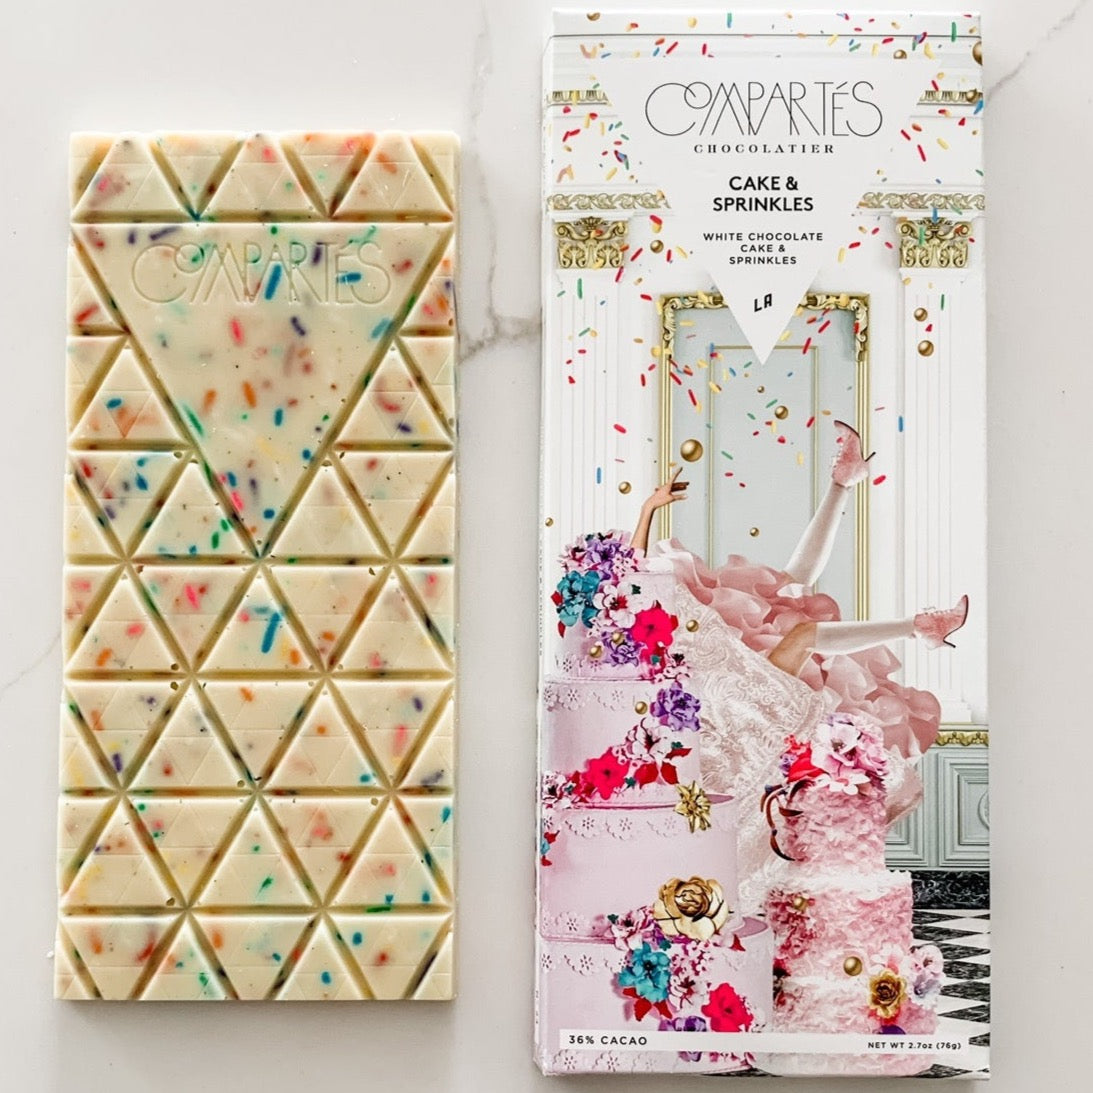 White chocolate bar with sprinkles next to packaging featuring ornate cake with woman stuck in it.